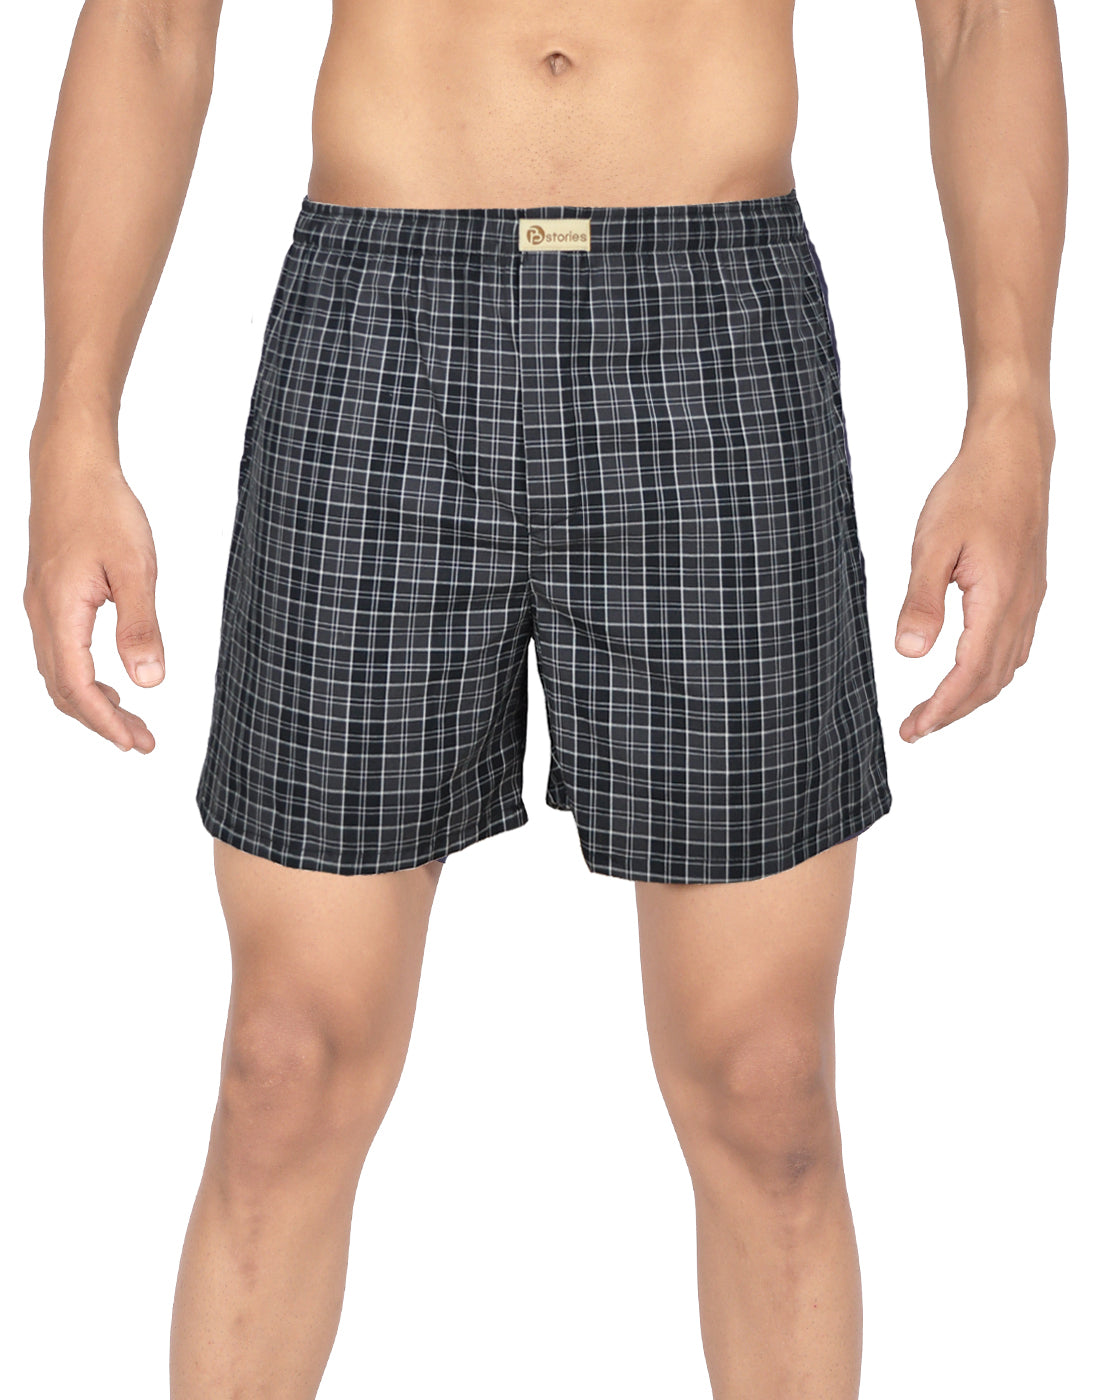 Boxers for Men(Pack of 3) - Assorted Colors